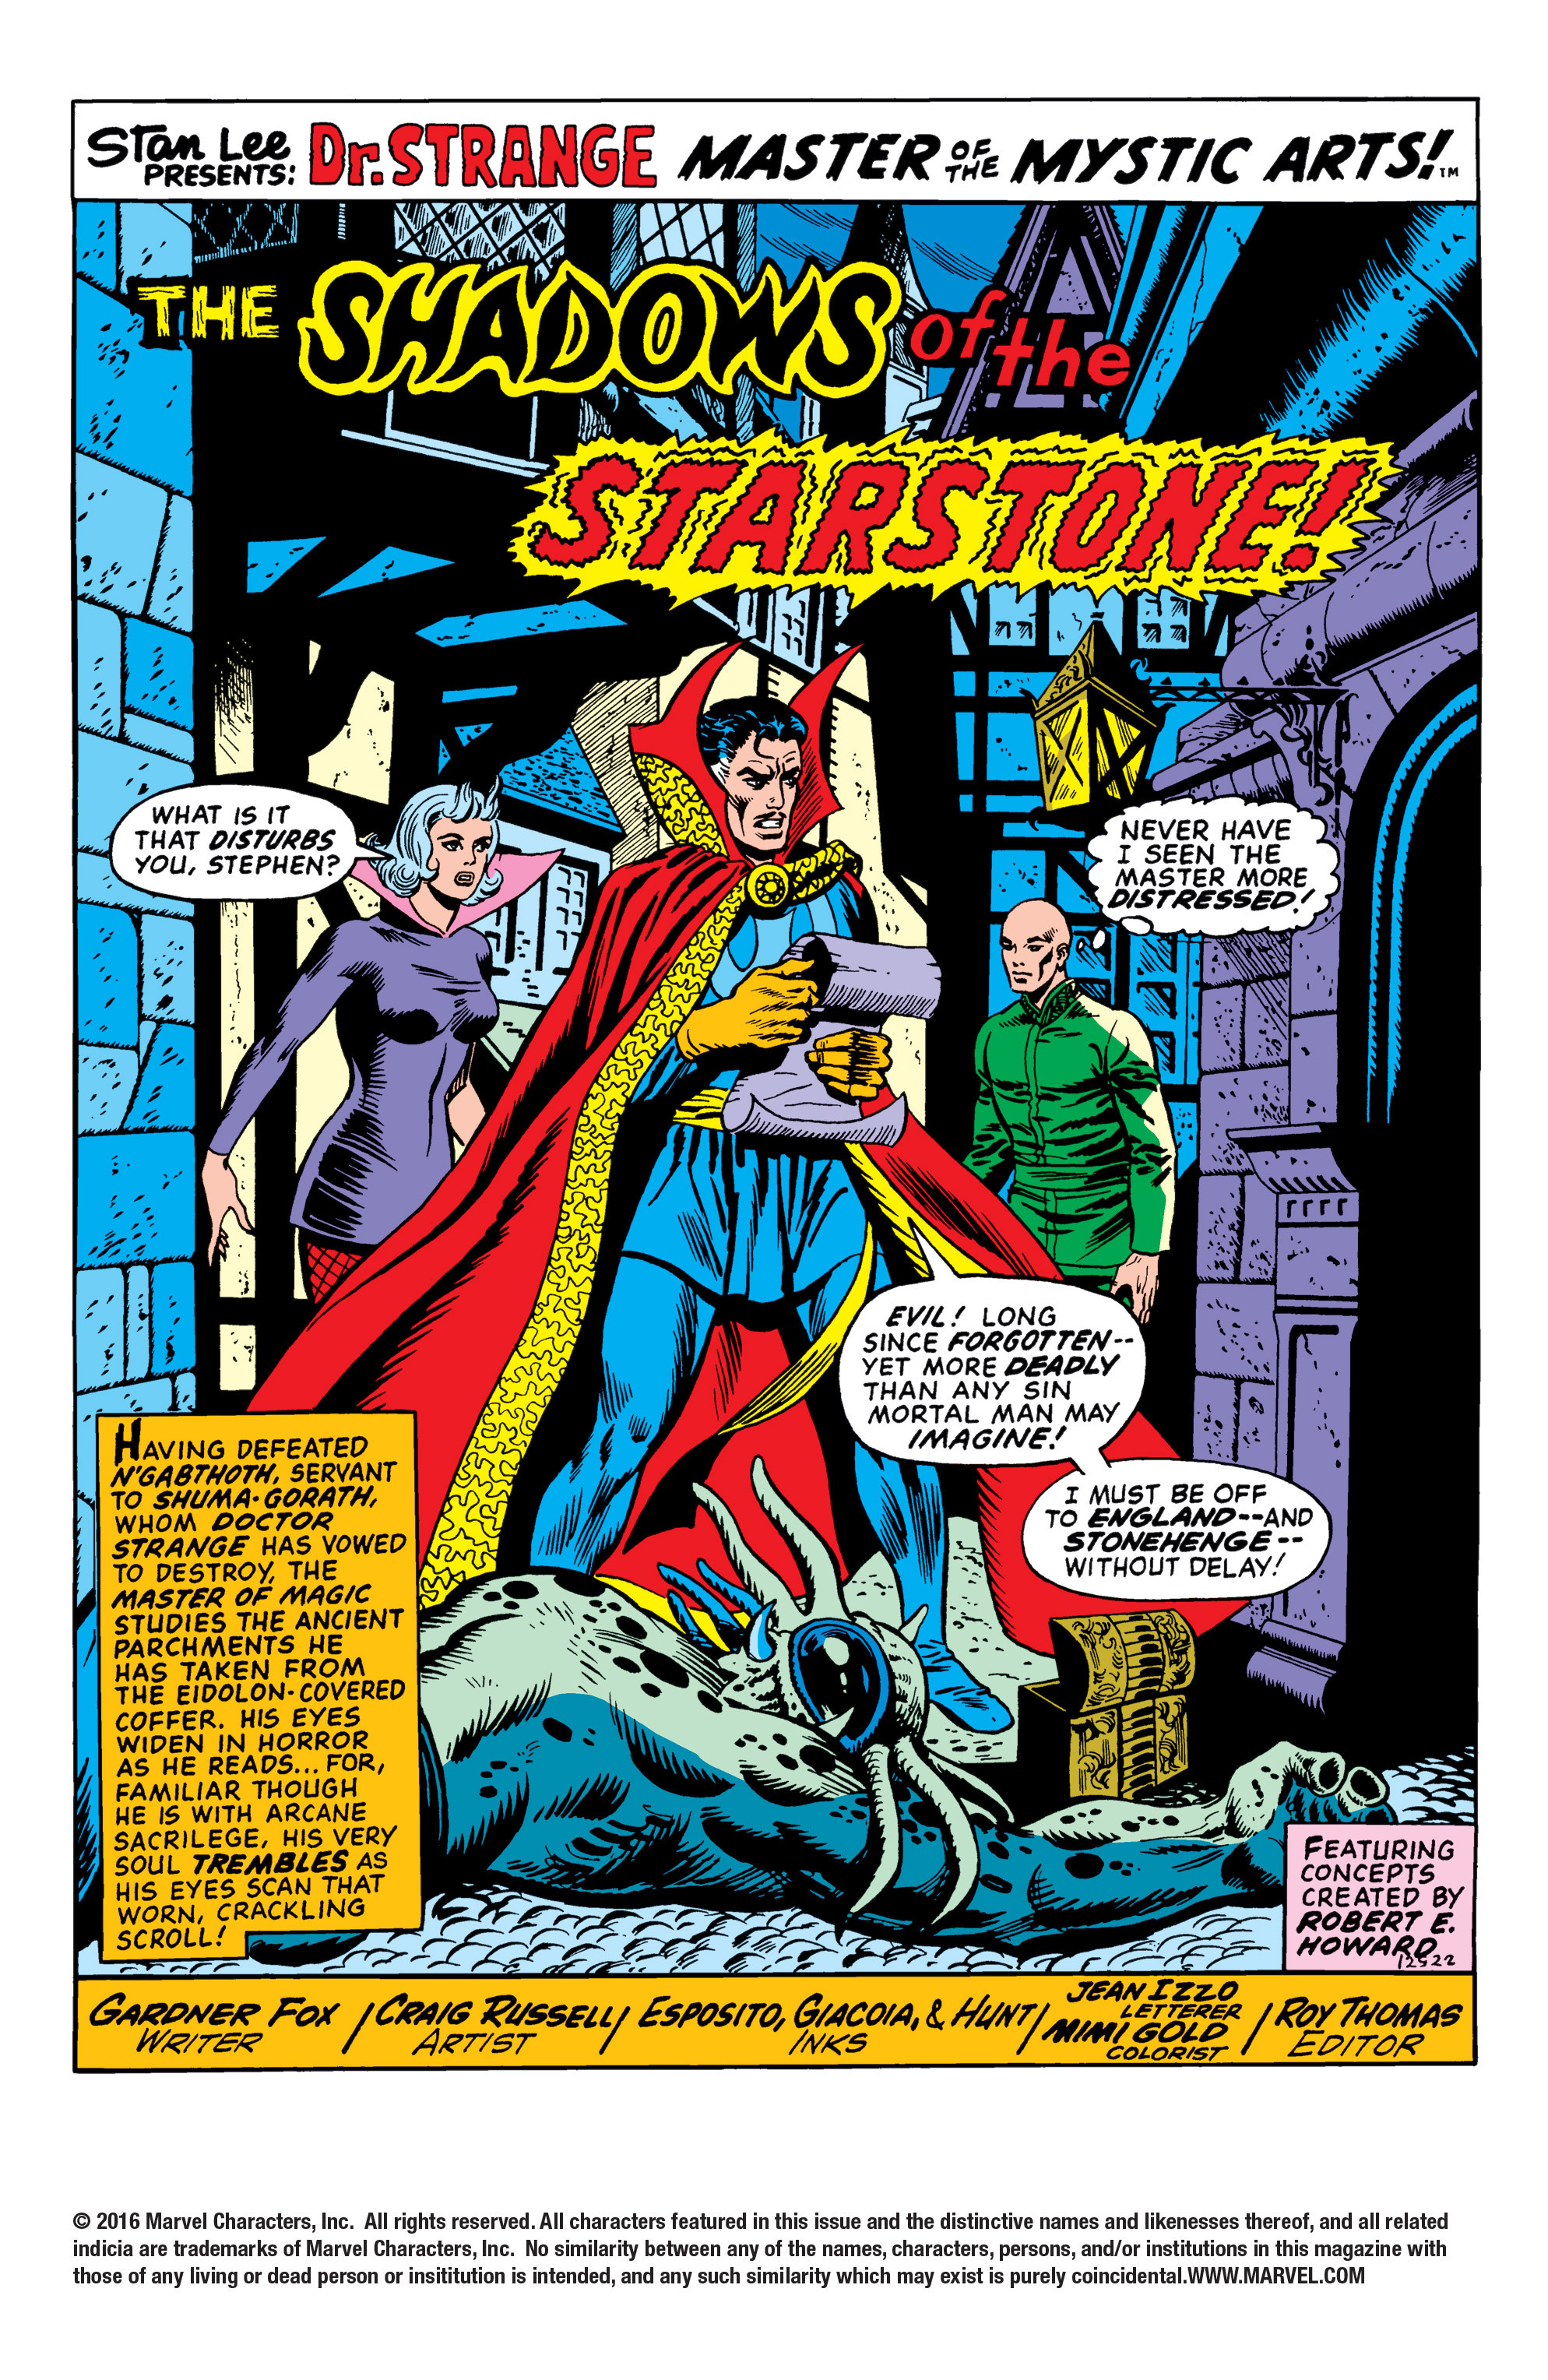 Read online Doctor Strange: What Is It That Disturbs You, Stephen? comic -  Issue # TPB - 93